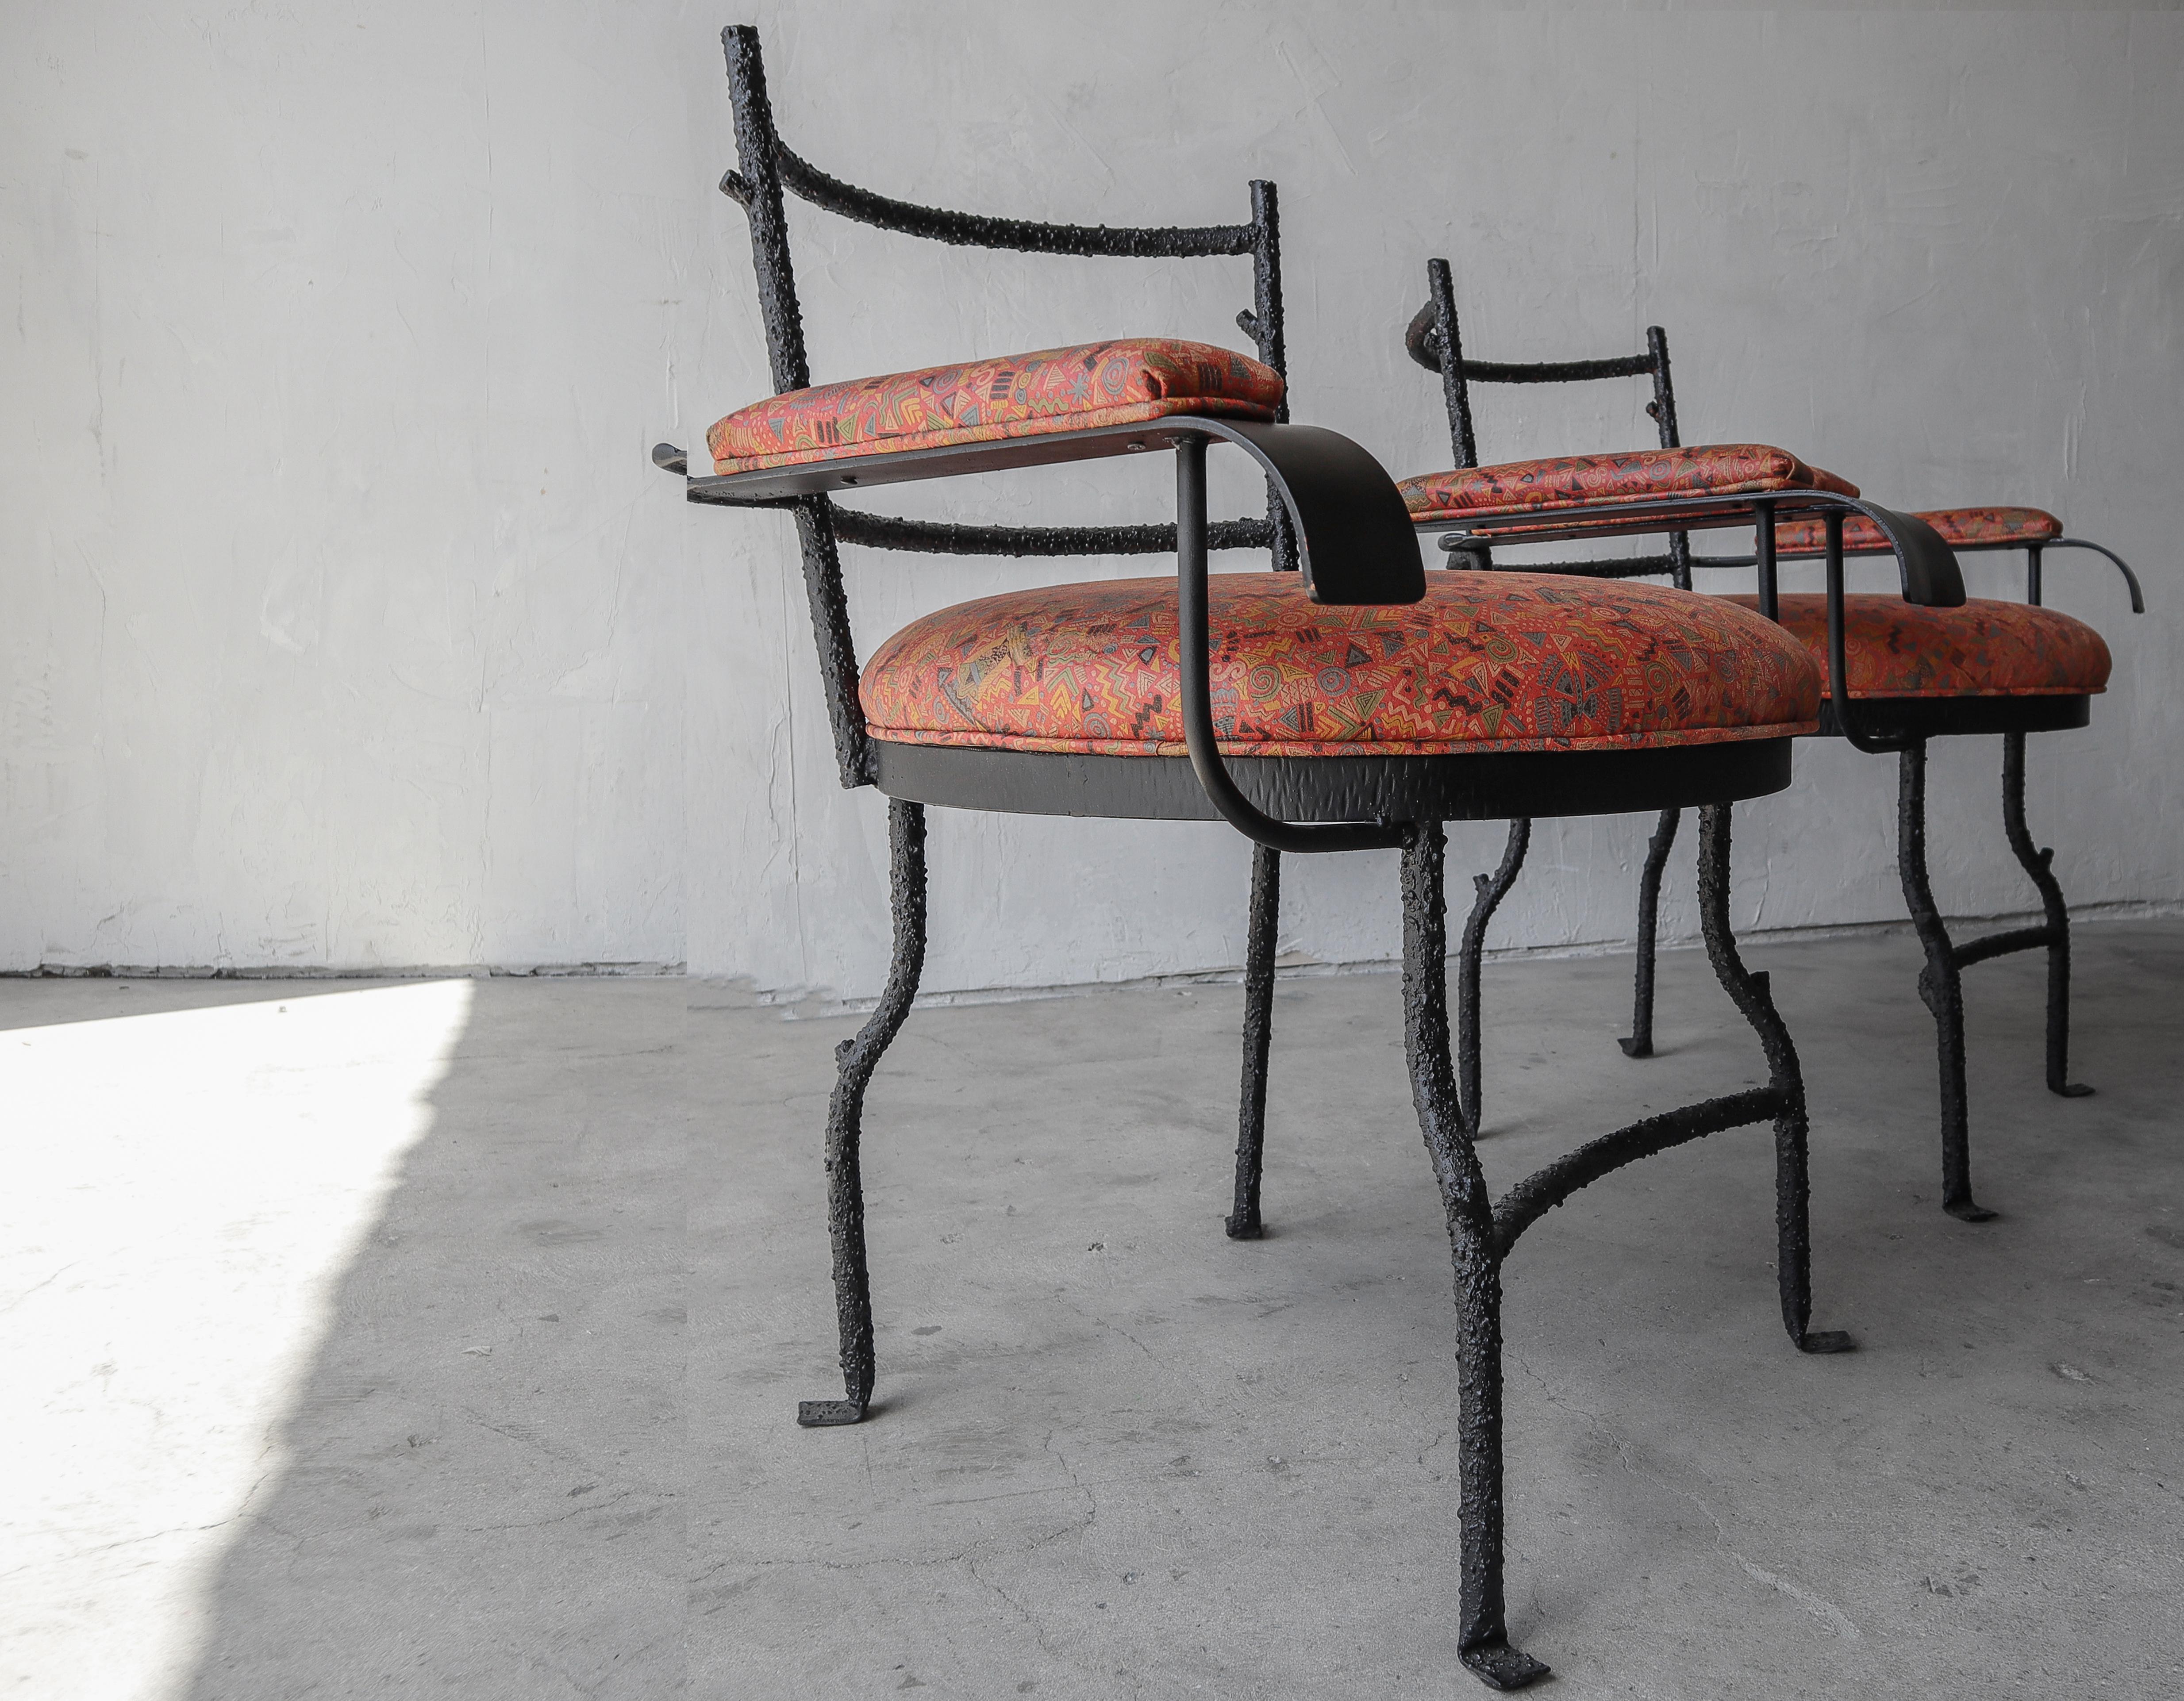 The beauty of this unique, bespoke pair of chairs is truly in the details. Pictures do not do them justice. The black metal frames have textured details giving them the appearance of branches. The arms and seats have been reupholstered with all new